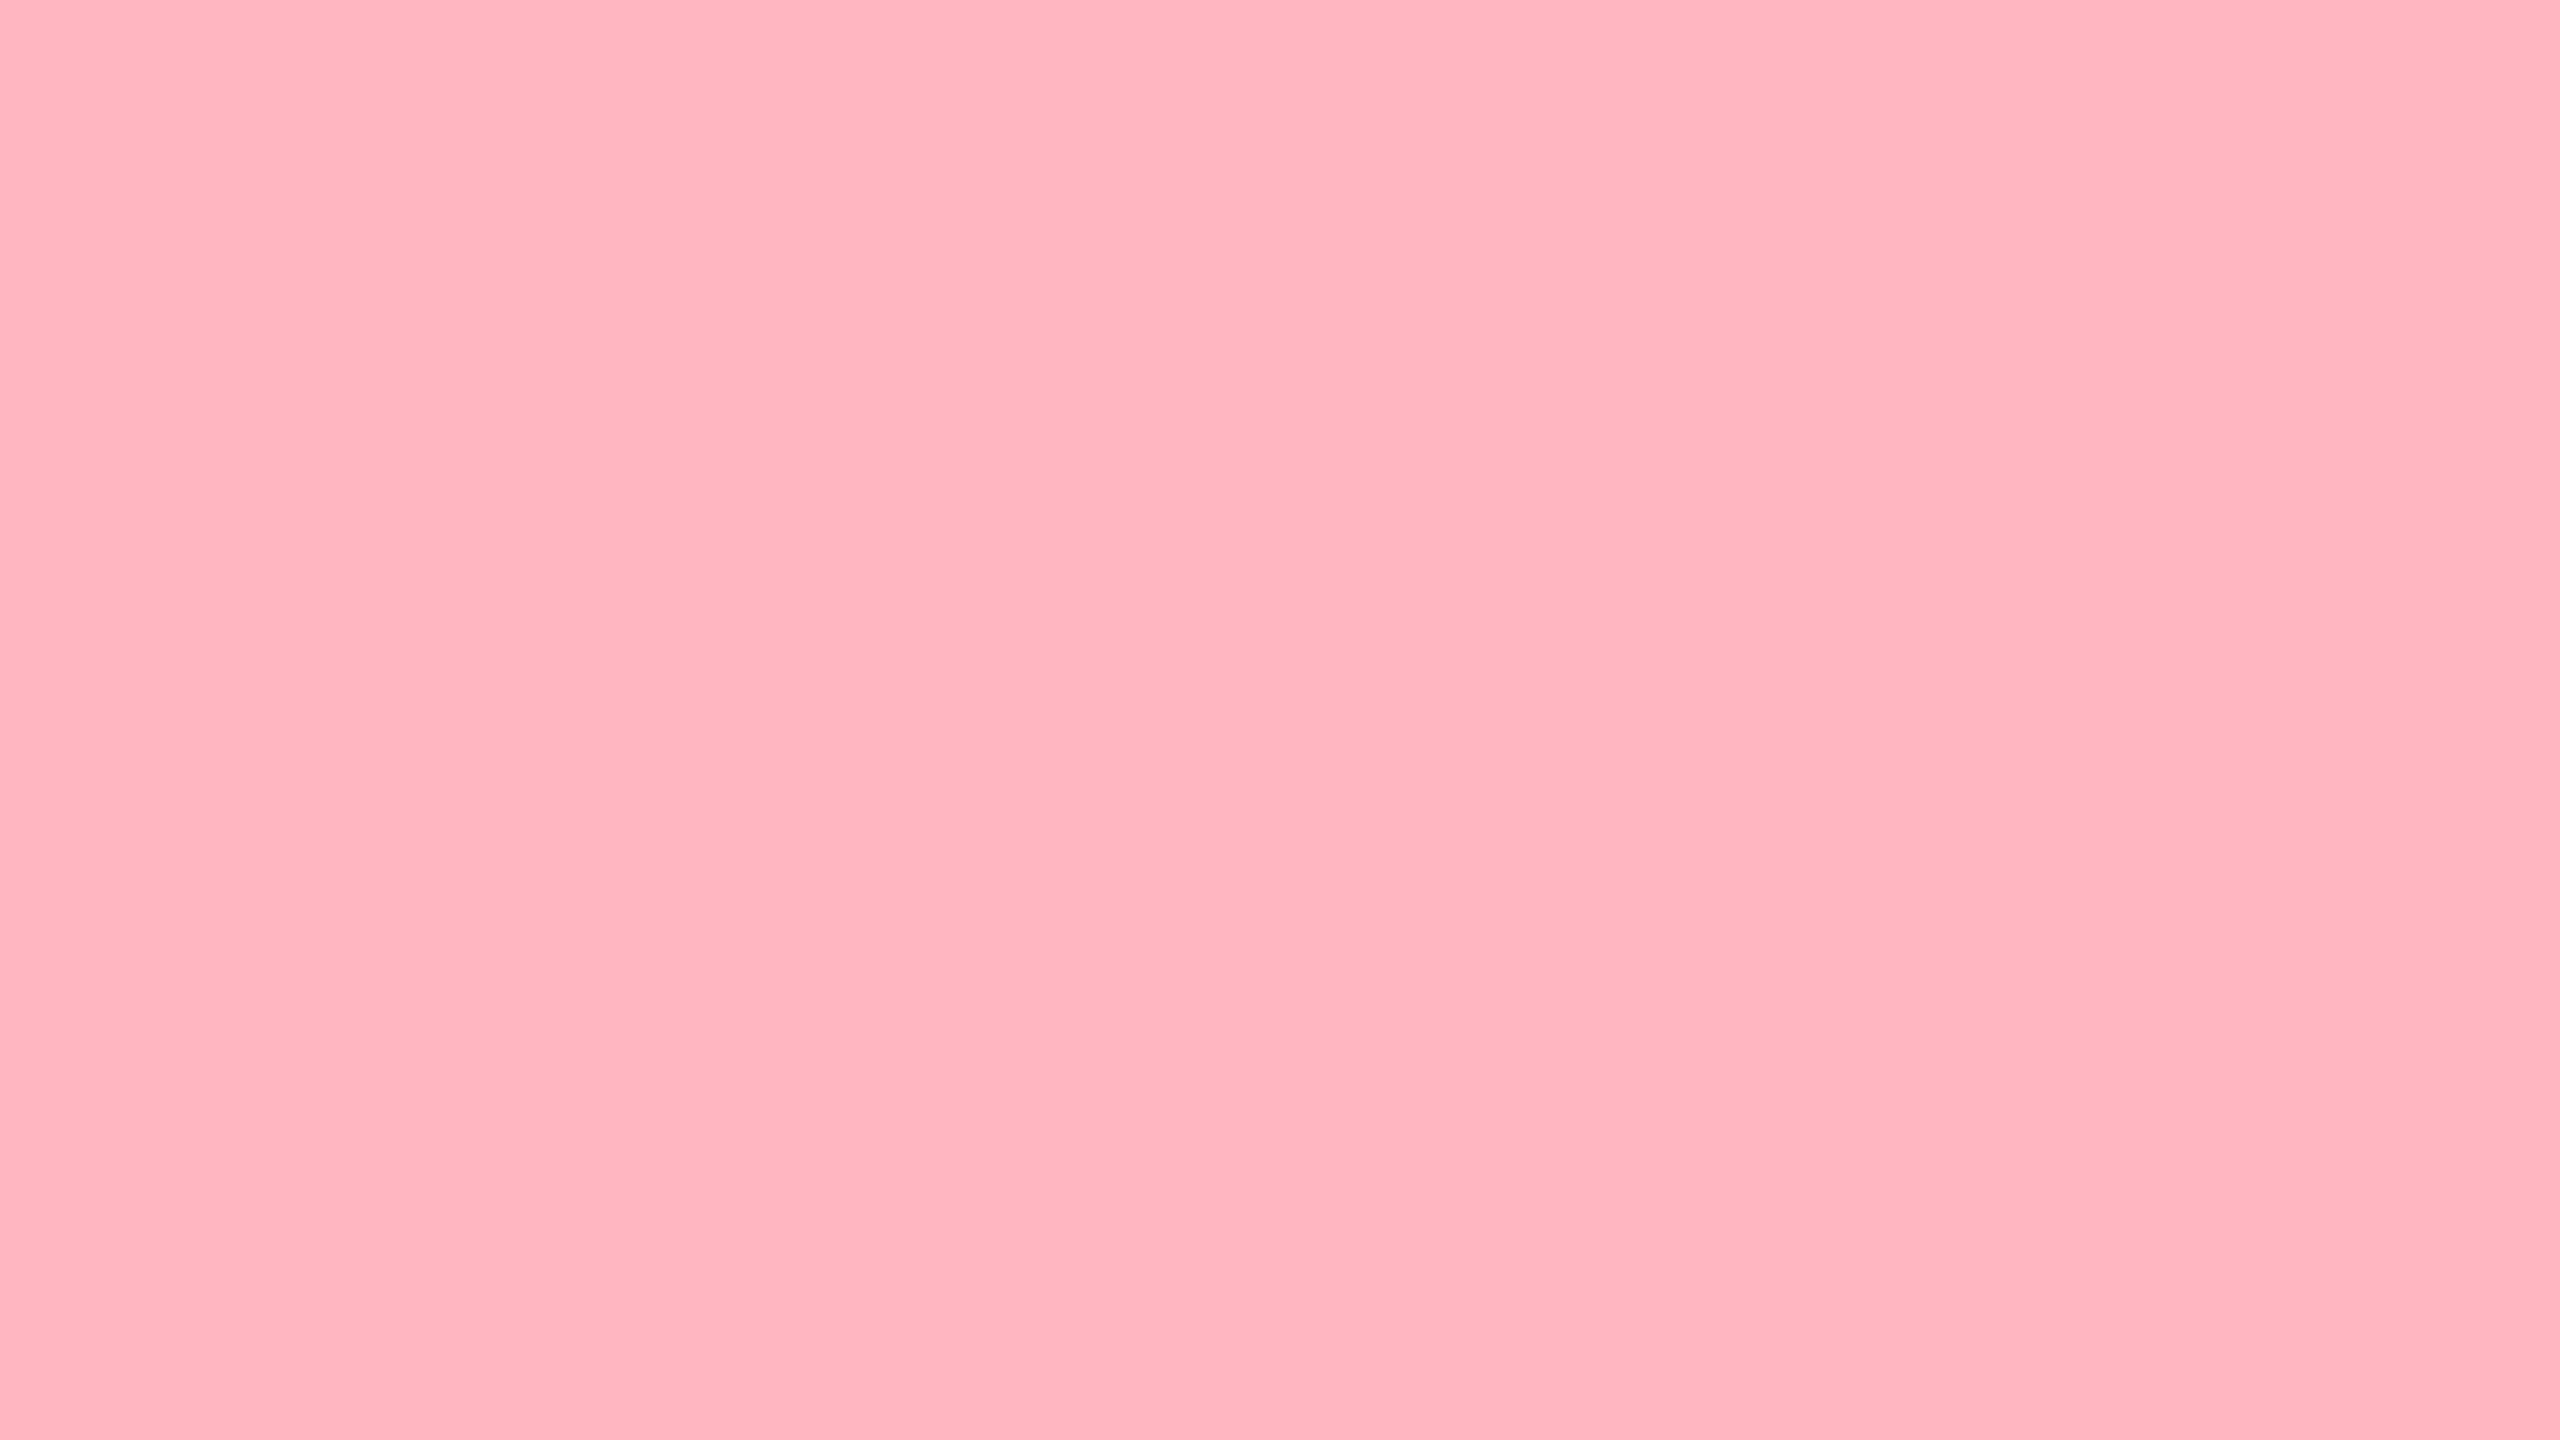 A pink background with no text - Soft pink, YouTube